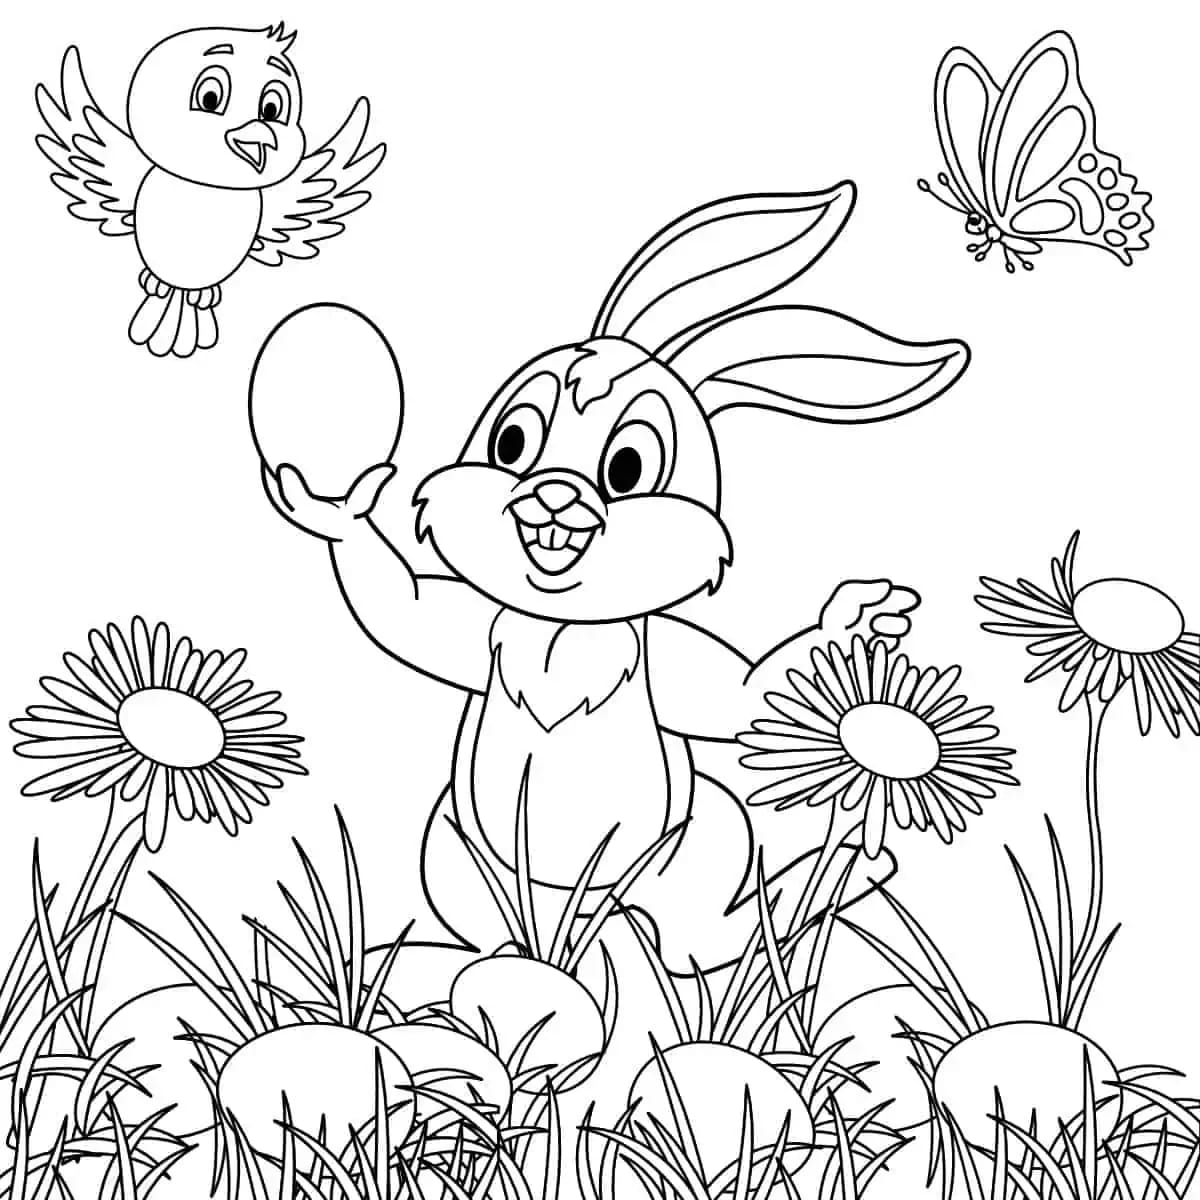 Easter-themed coloring pages and activity books